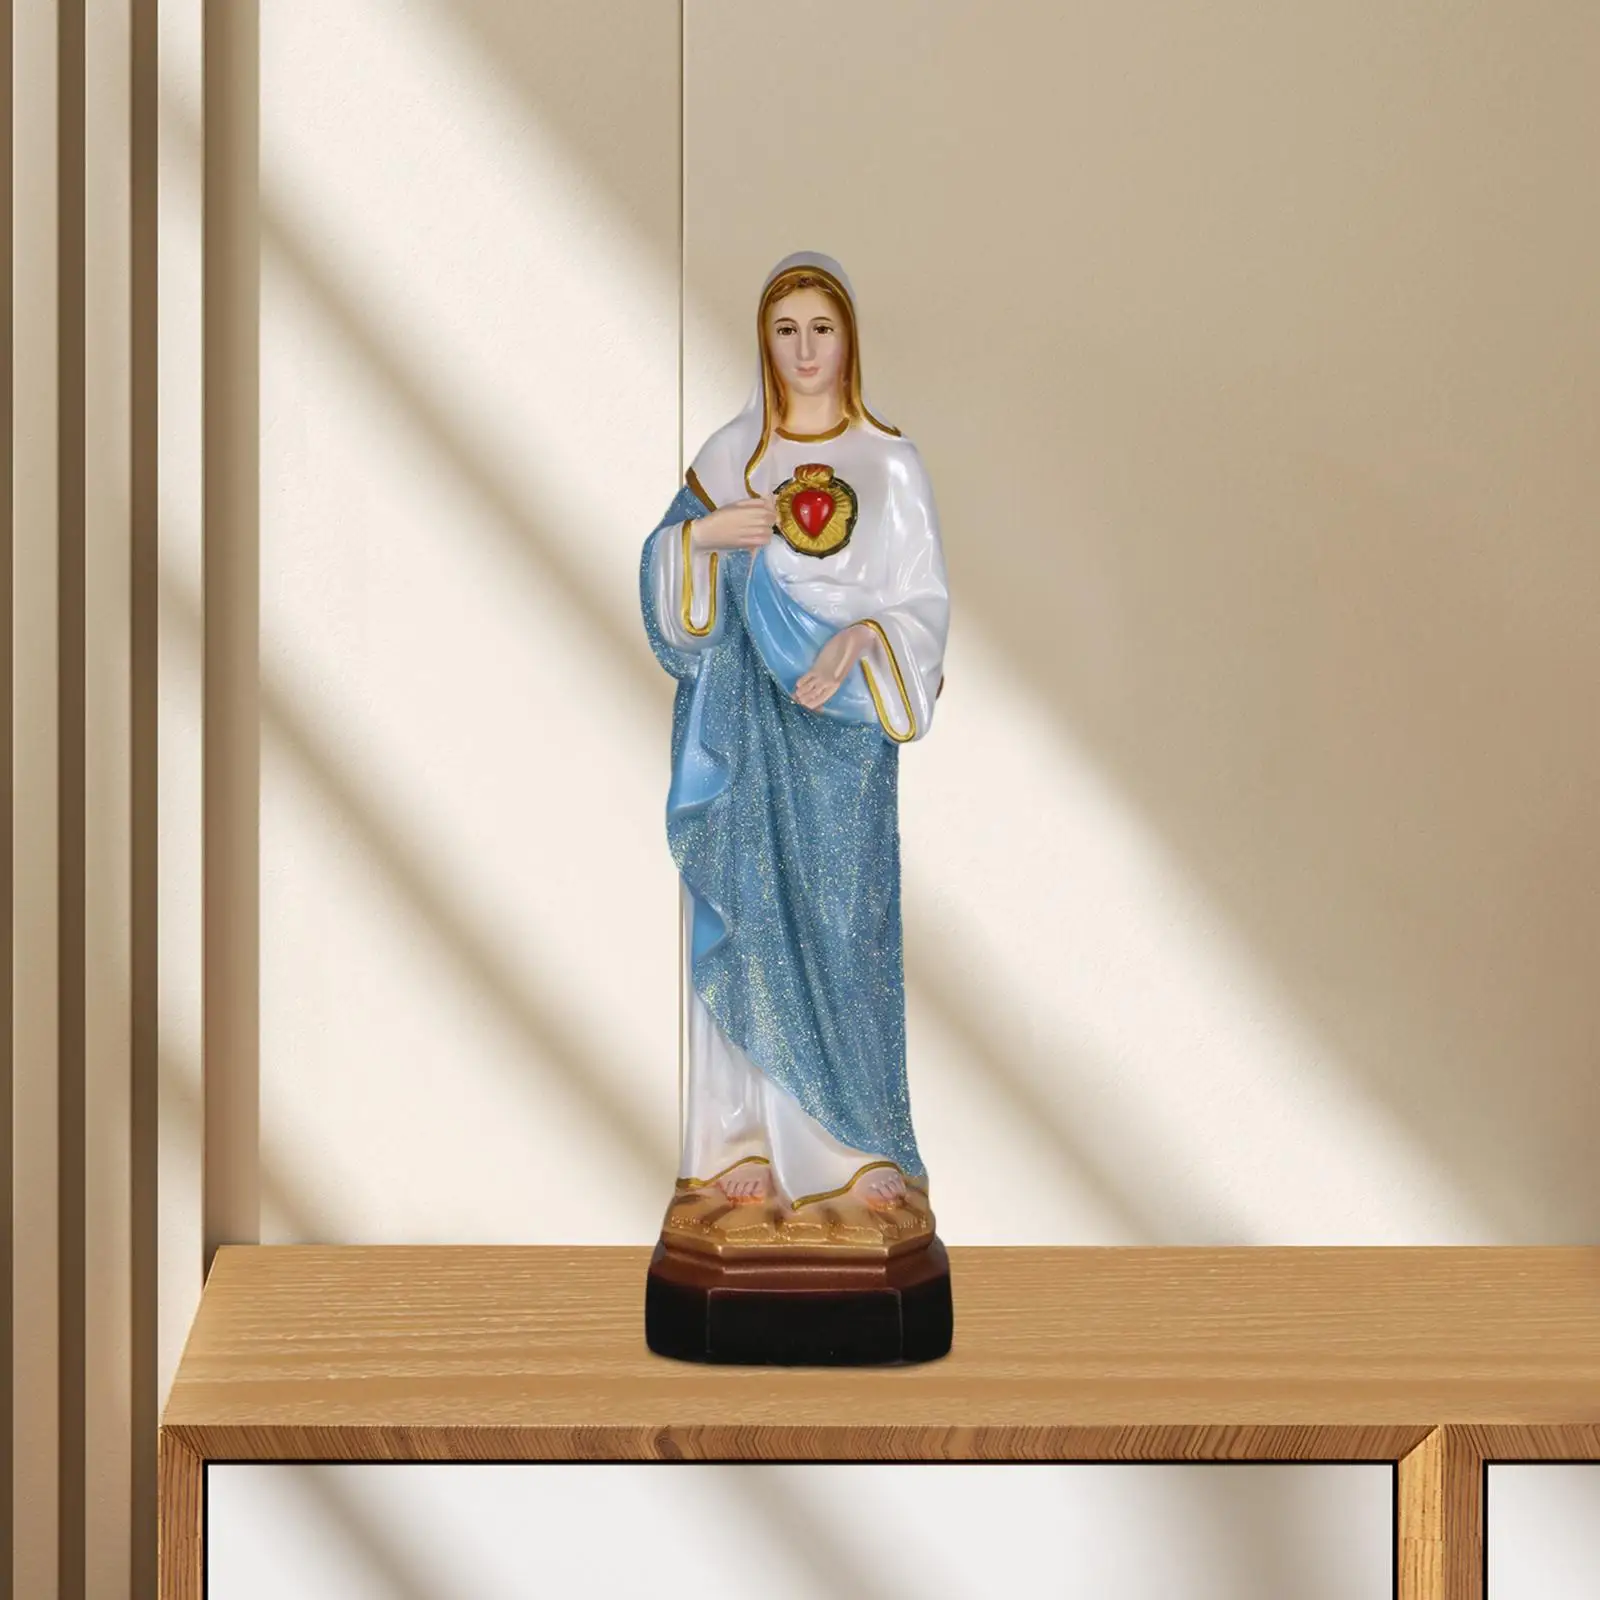 Holy Mary Figure 13.78 inch Tabletop Display Collection Crafts Religious Gifts Decorative Catholic Statue for Shelf Home Office